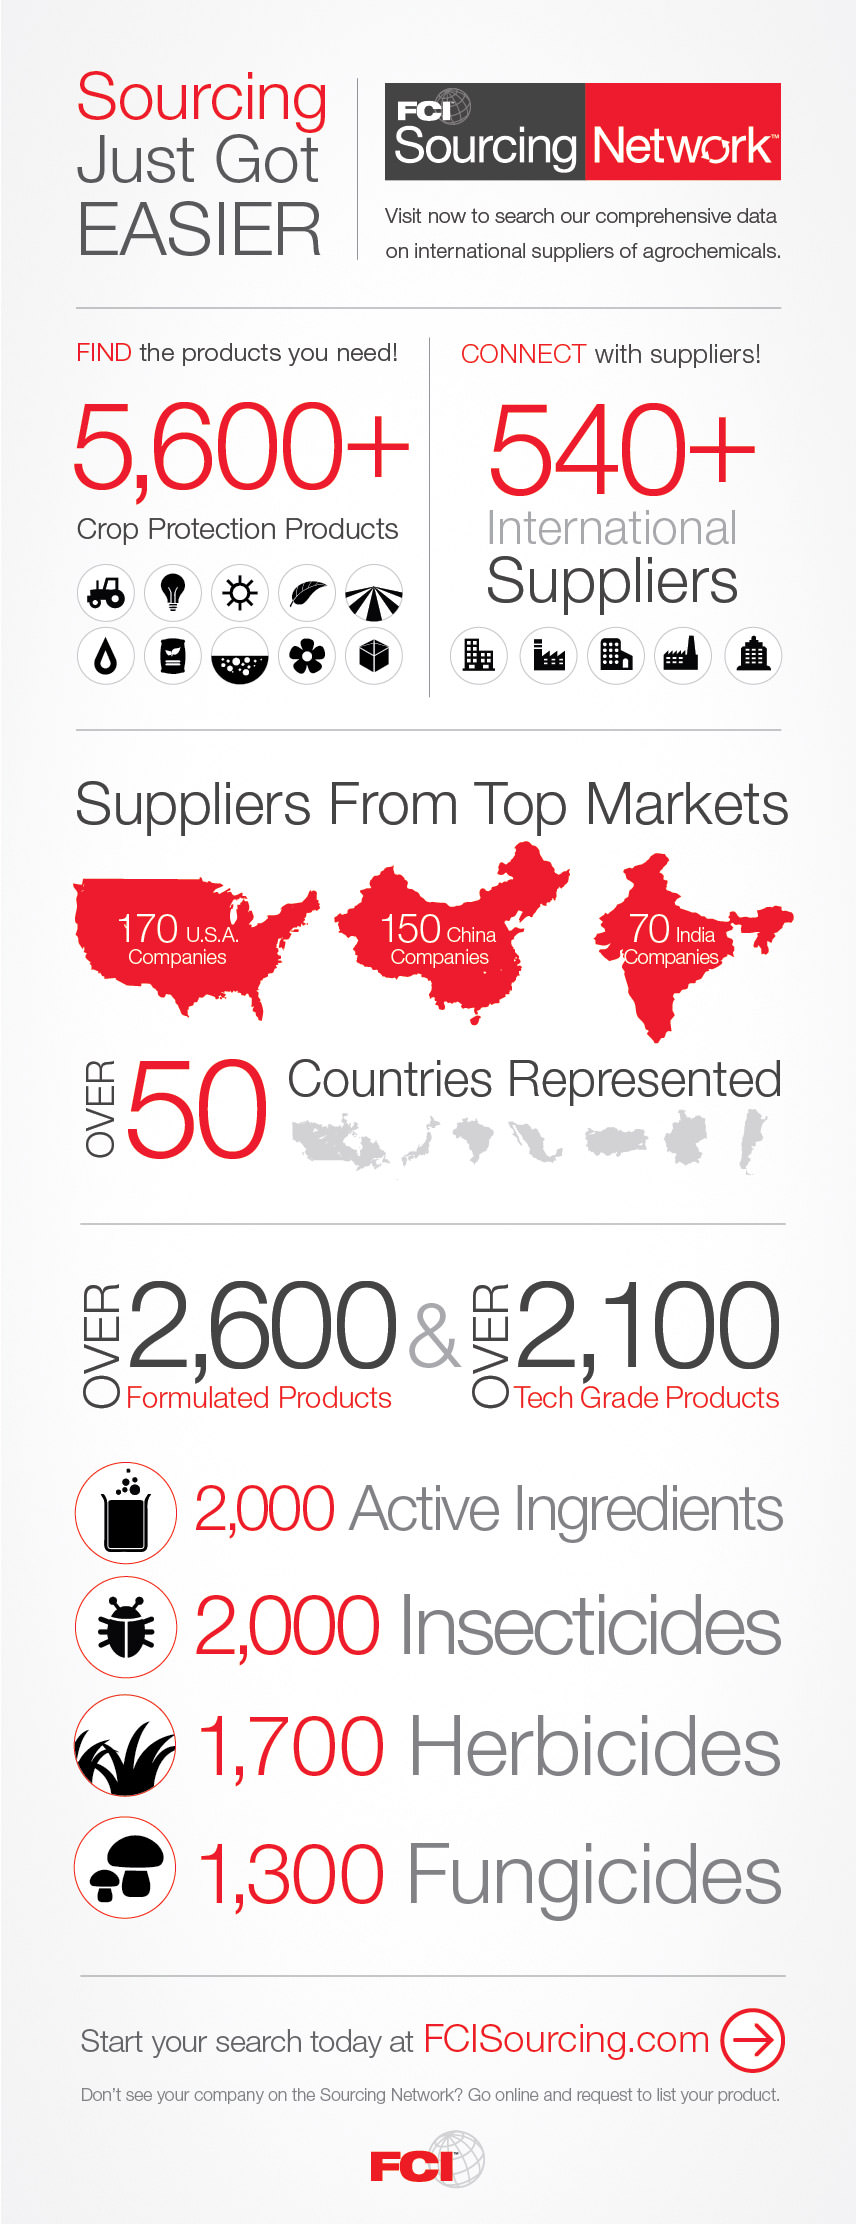 FCI Sourcing Network Infographic